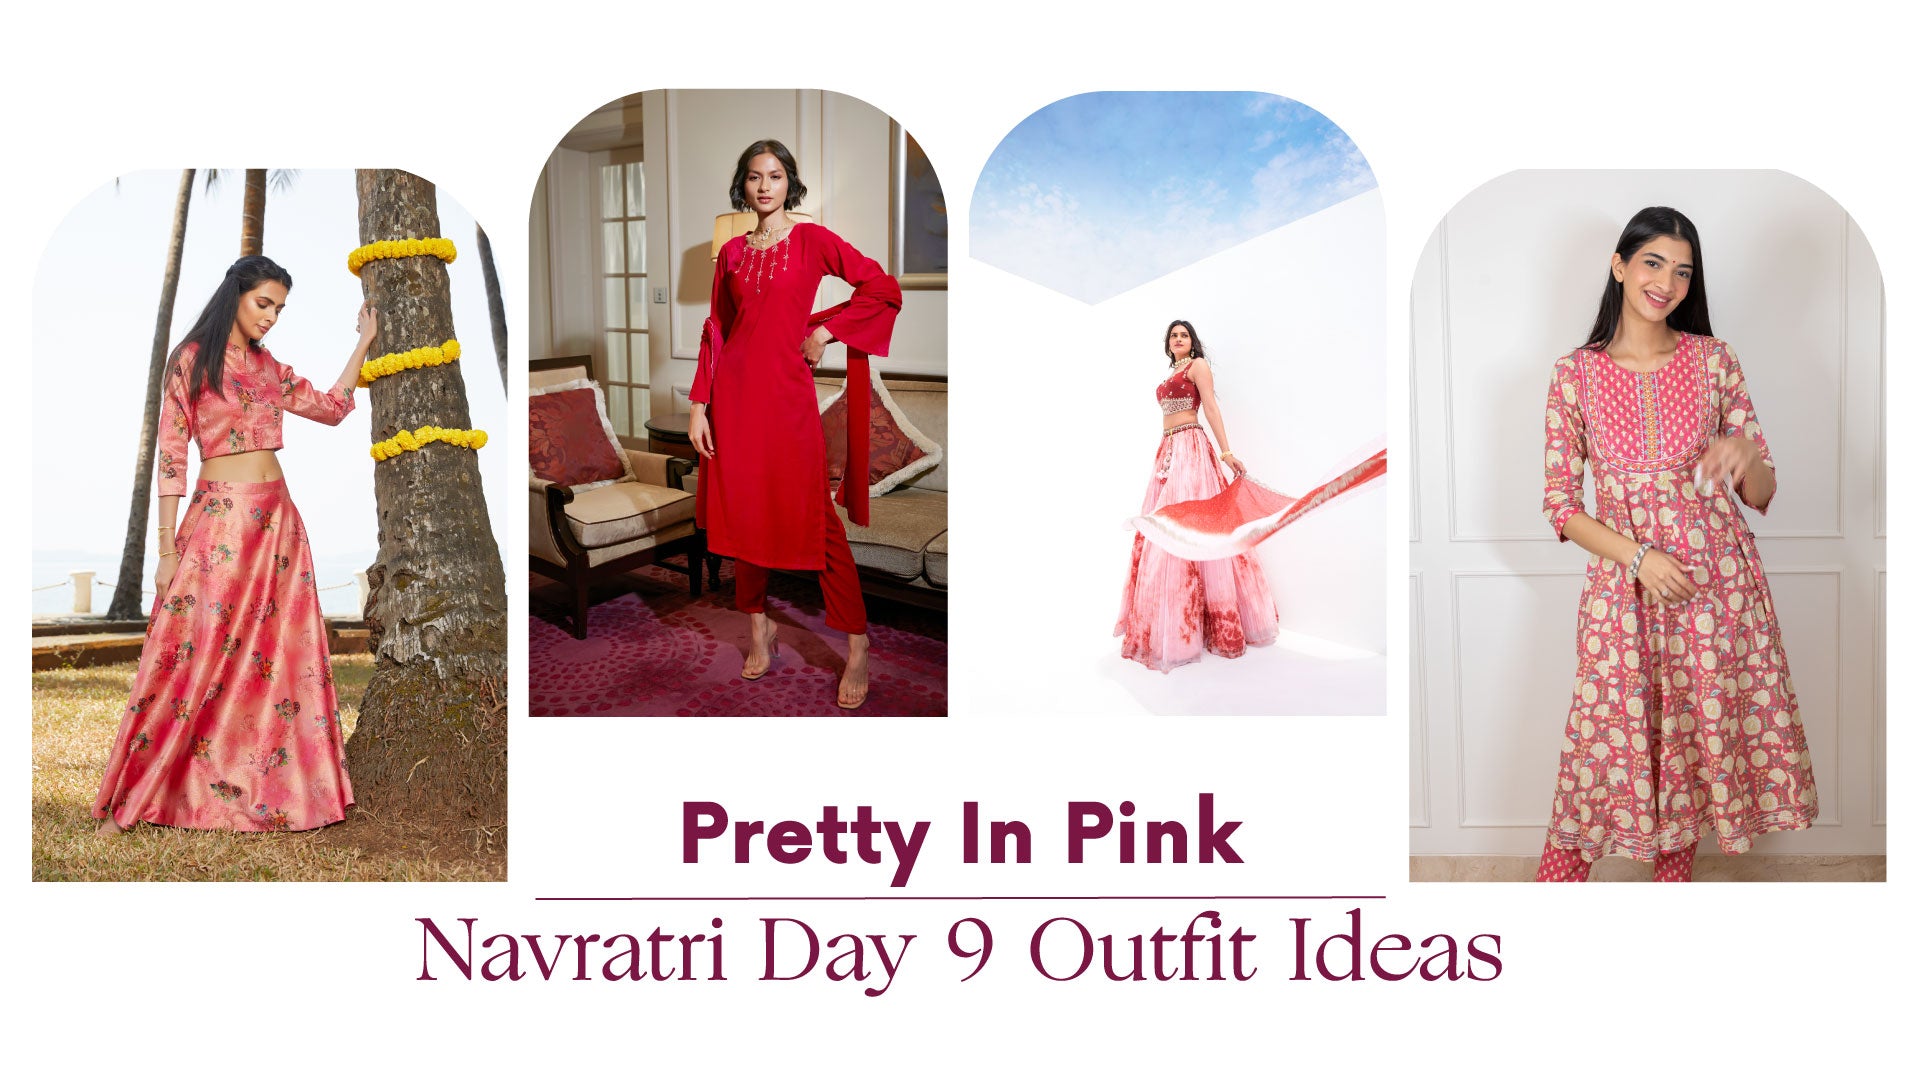 Pretty In Pink: Navratri Day 9 Outfit Ideas